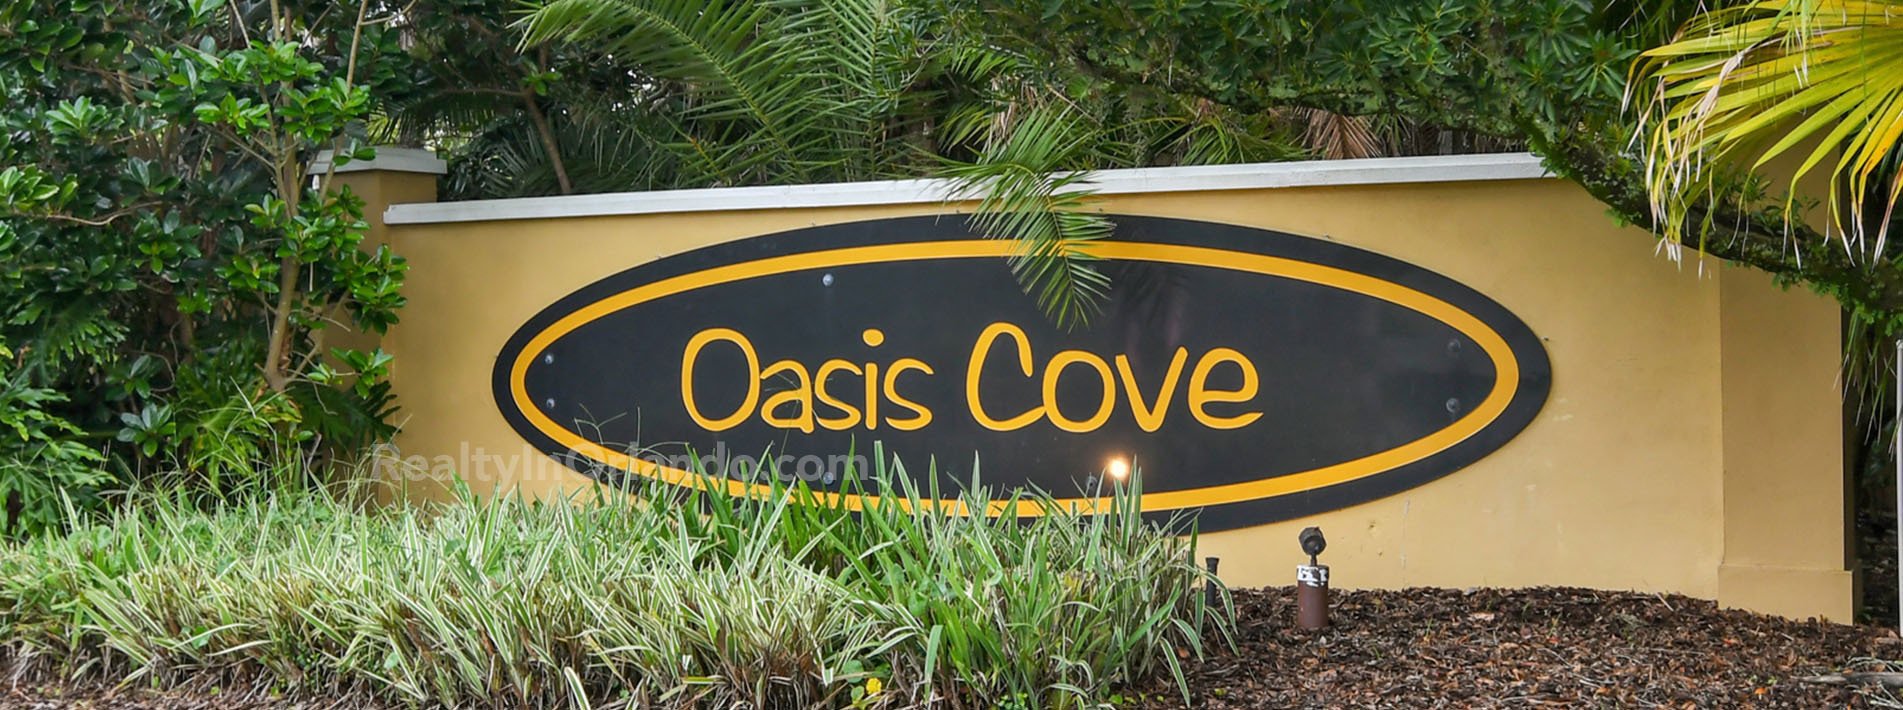 Oasis Cove Homes for Sale